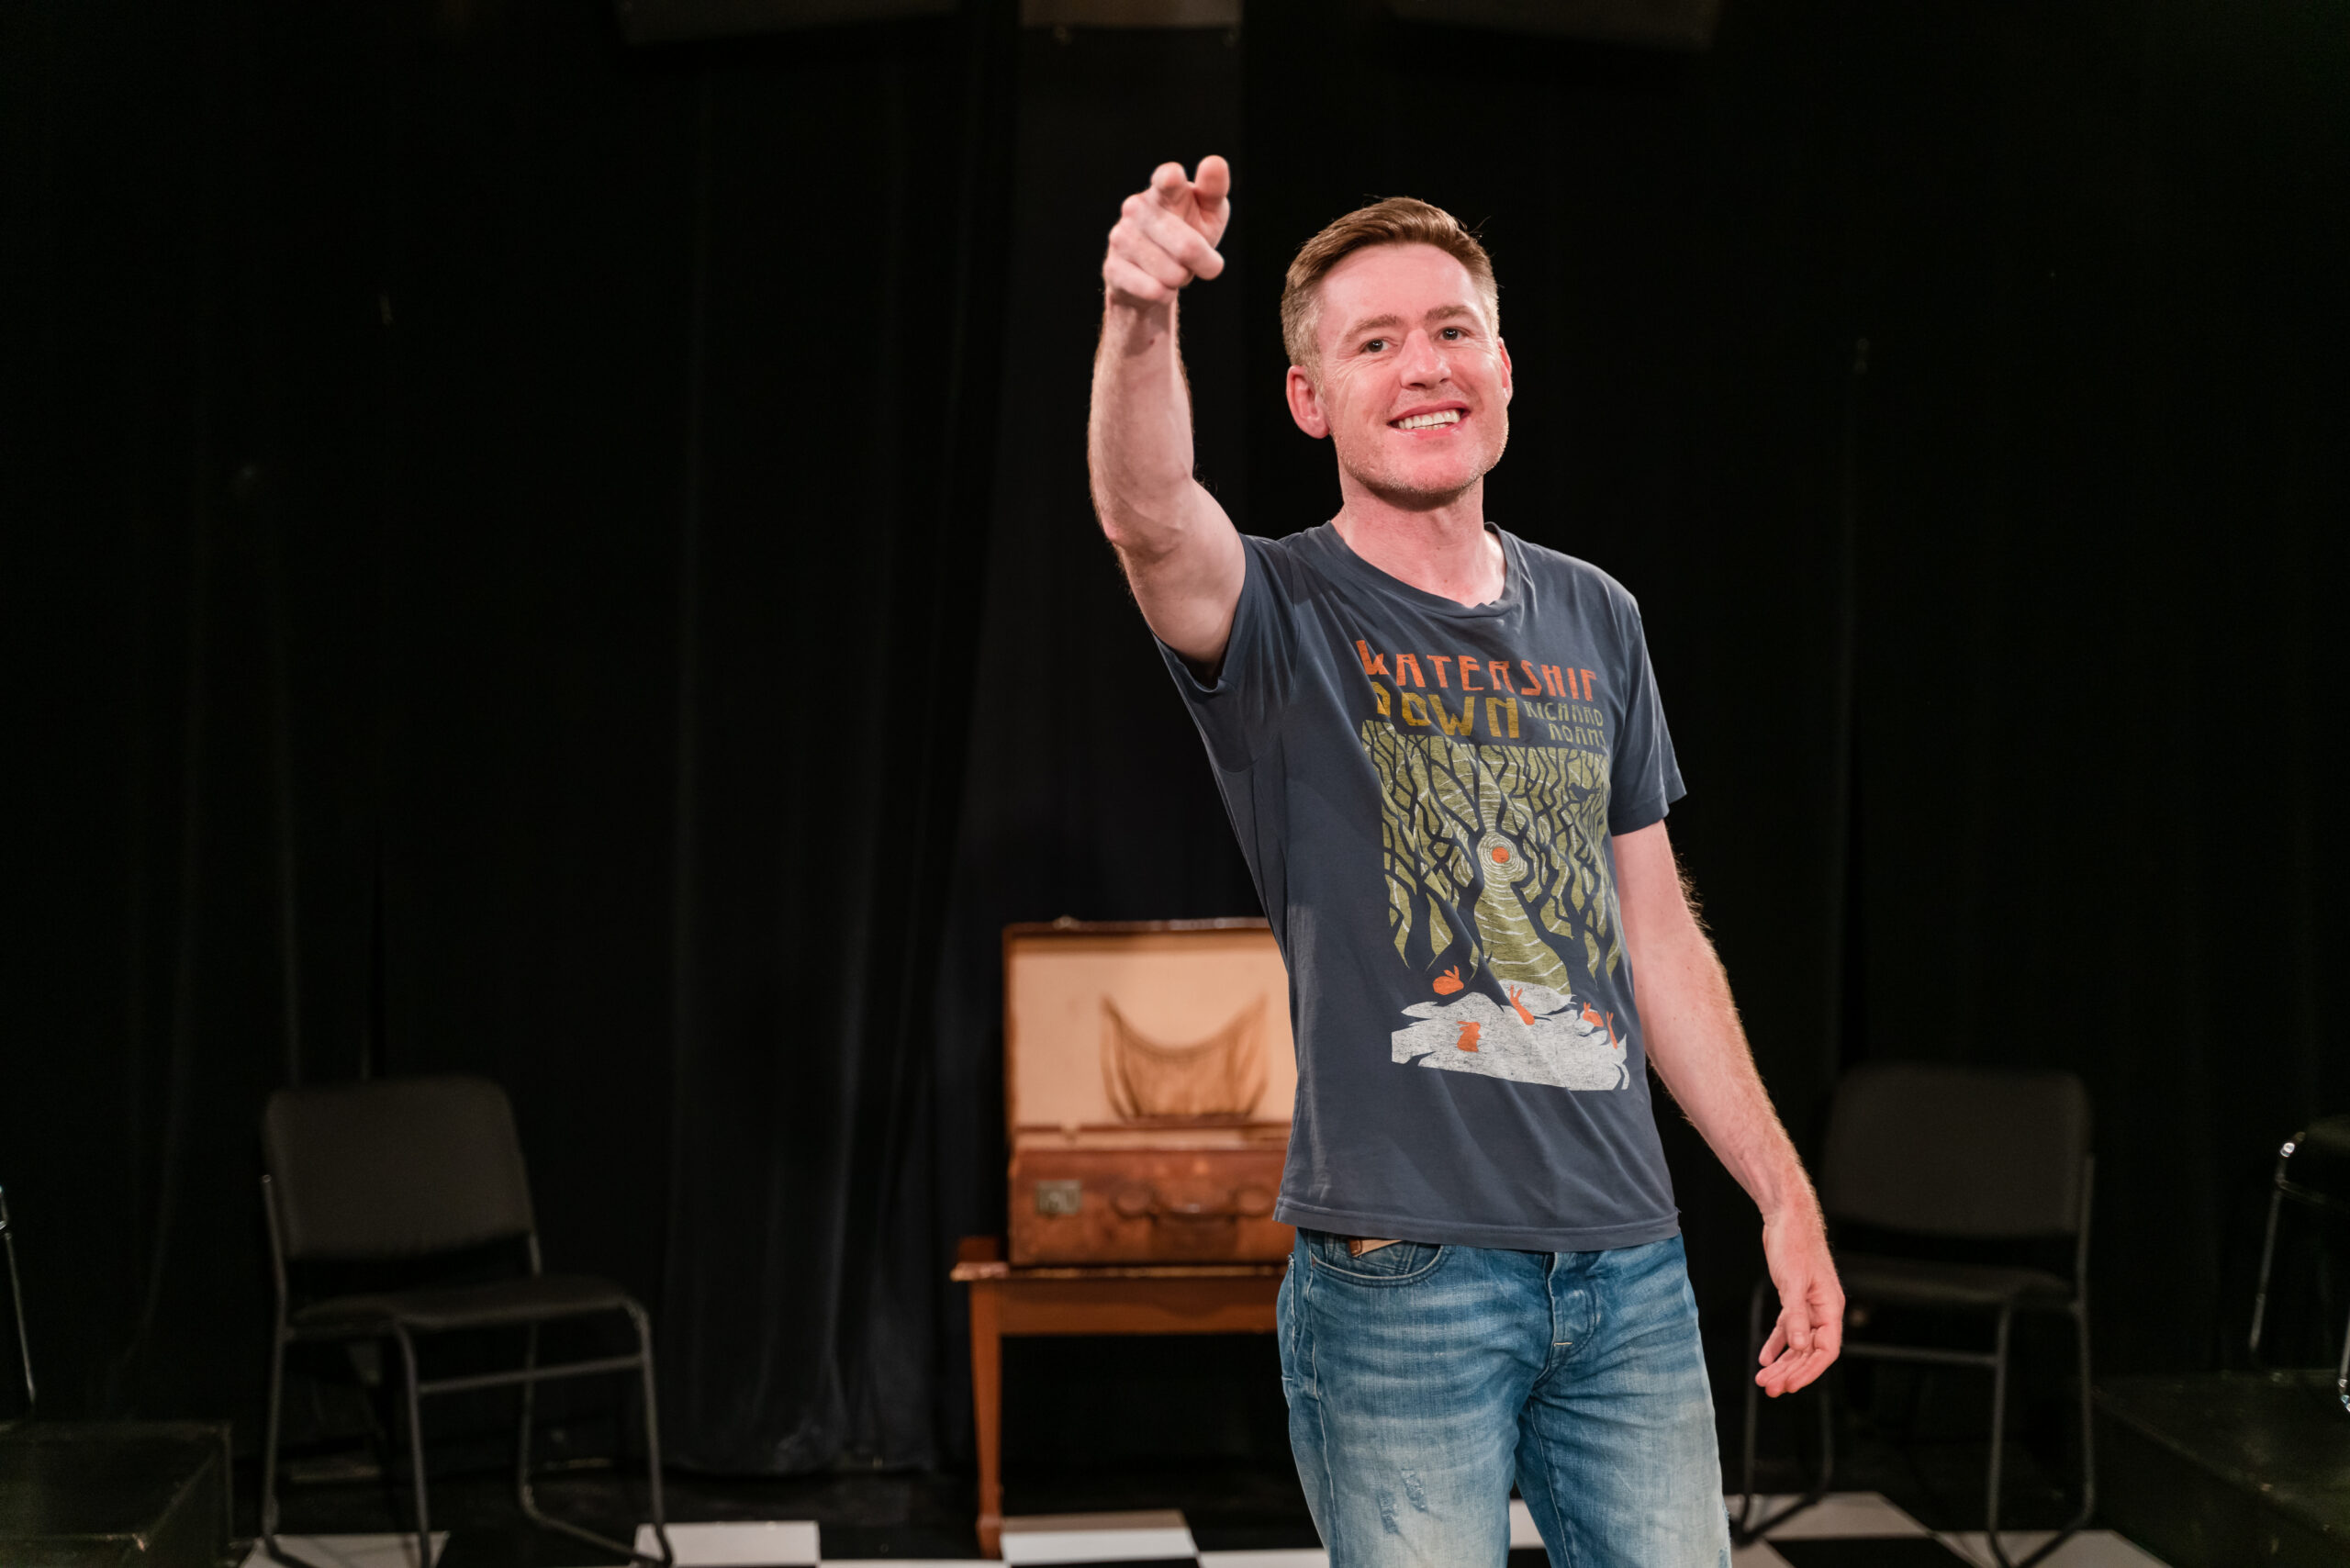 Gavin Crawford stands on a stage, pointing out into the audience. A single, empty chair sits behind him. Crawford wears a grey graphic t-shirt and jeans, and smiles as he speaks.